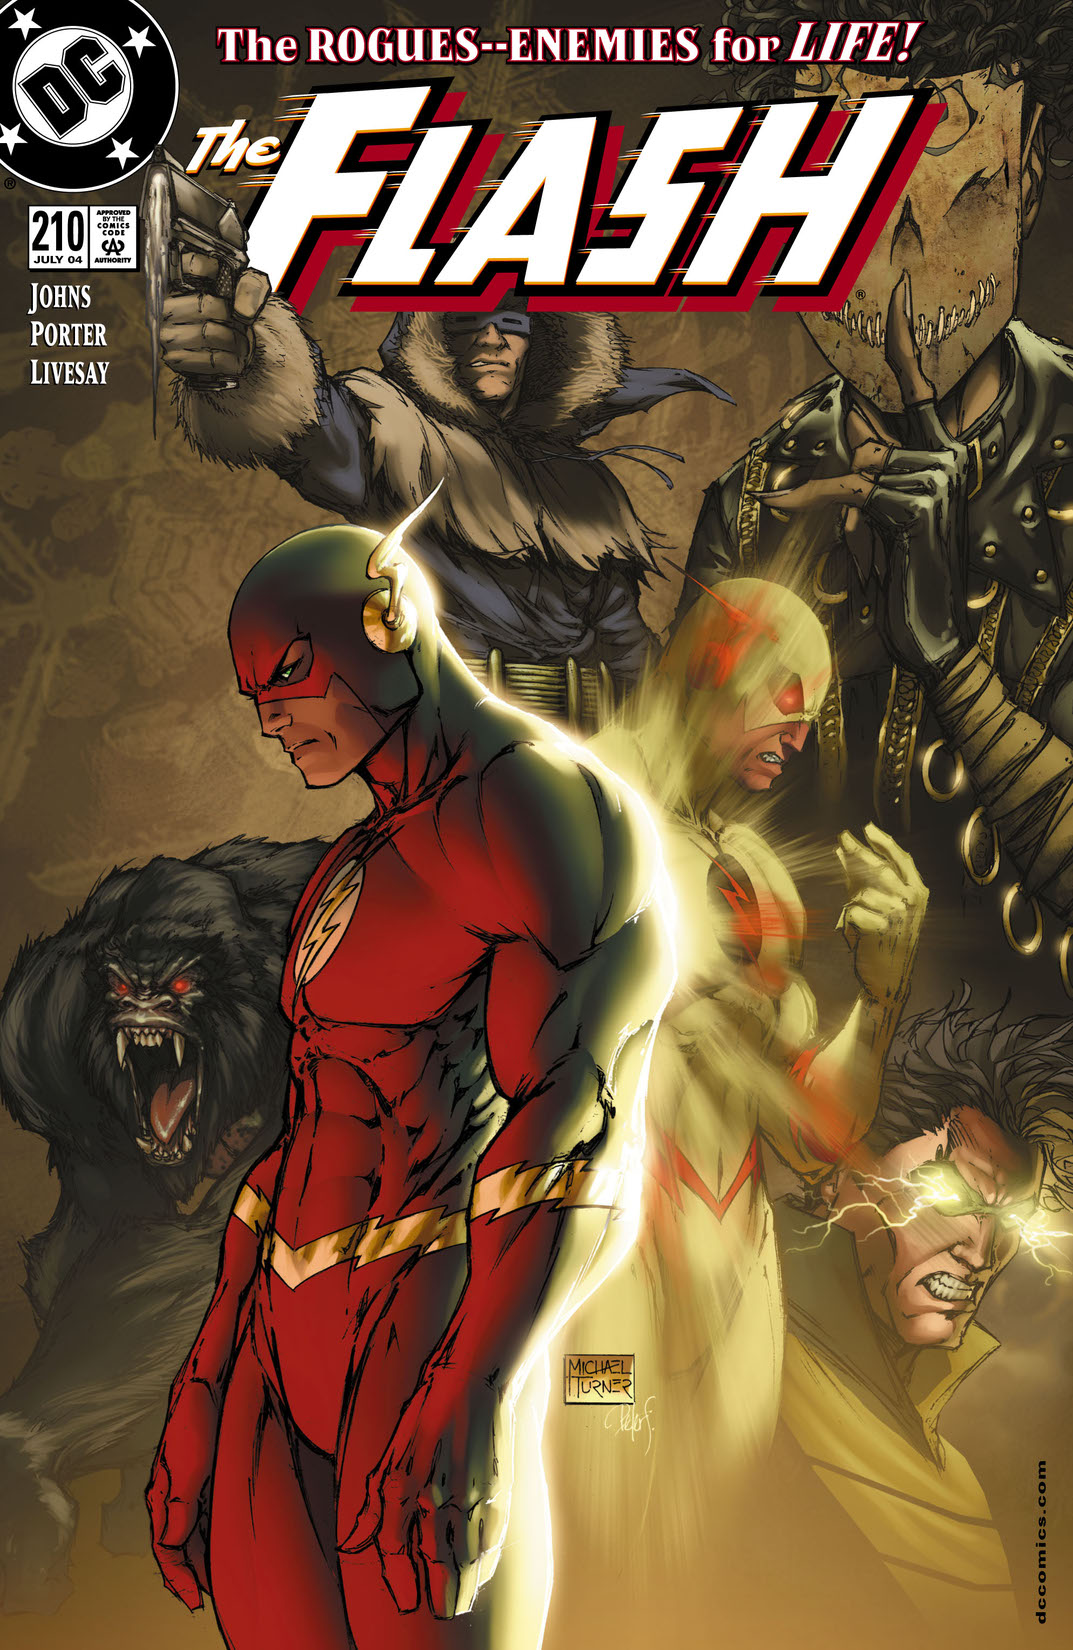 The Flash (1987-) #210 preview images